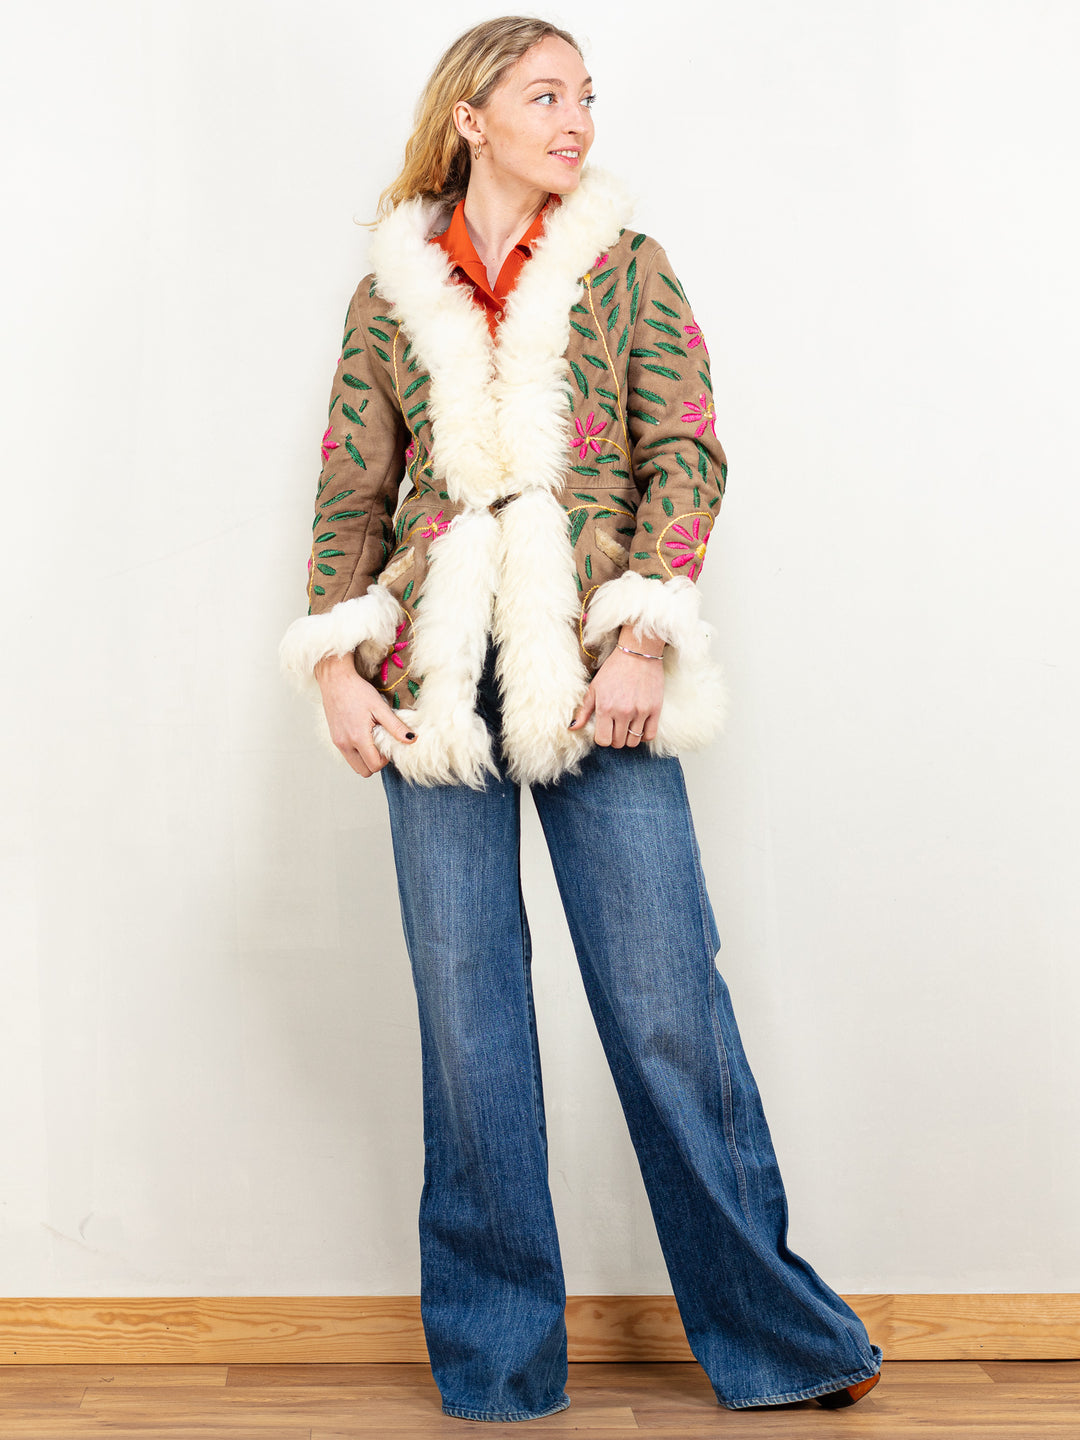 Afghan Coat Vintage style sheepskin shearling penny lane almost famous boho hippie psychedelic funky swinging london embroidery size medium